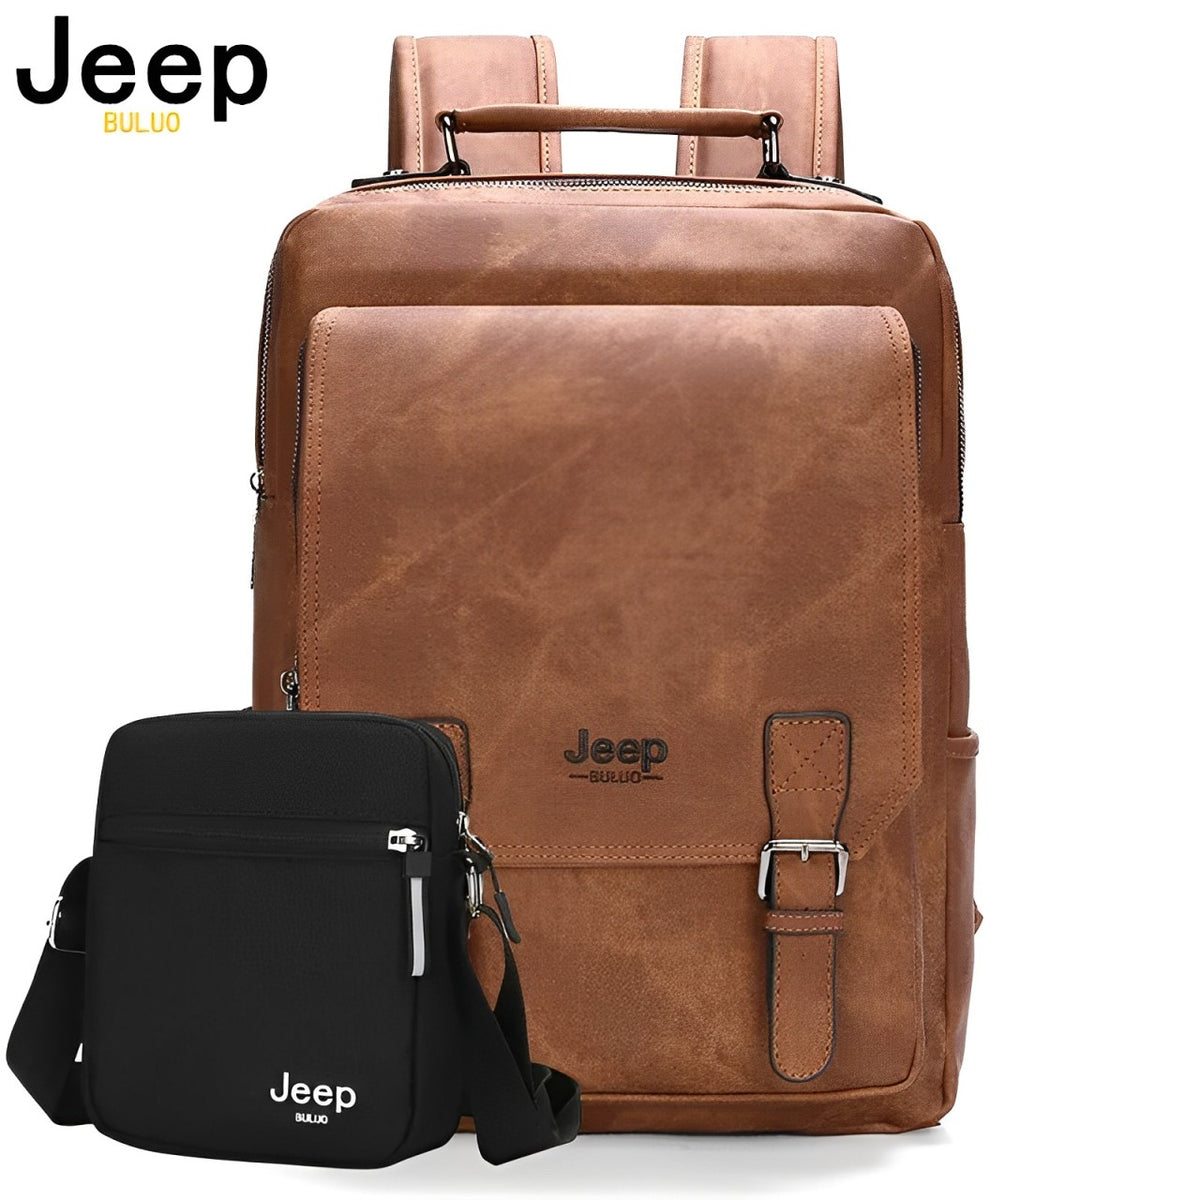 Jeep Buluo Laptop Business Leather Bag